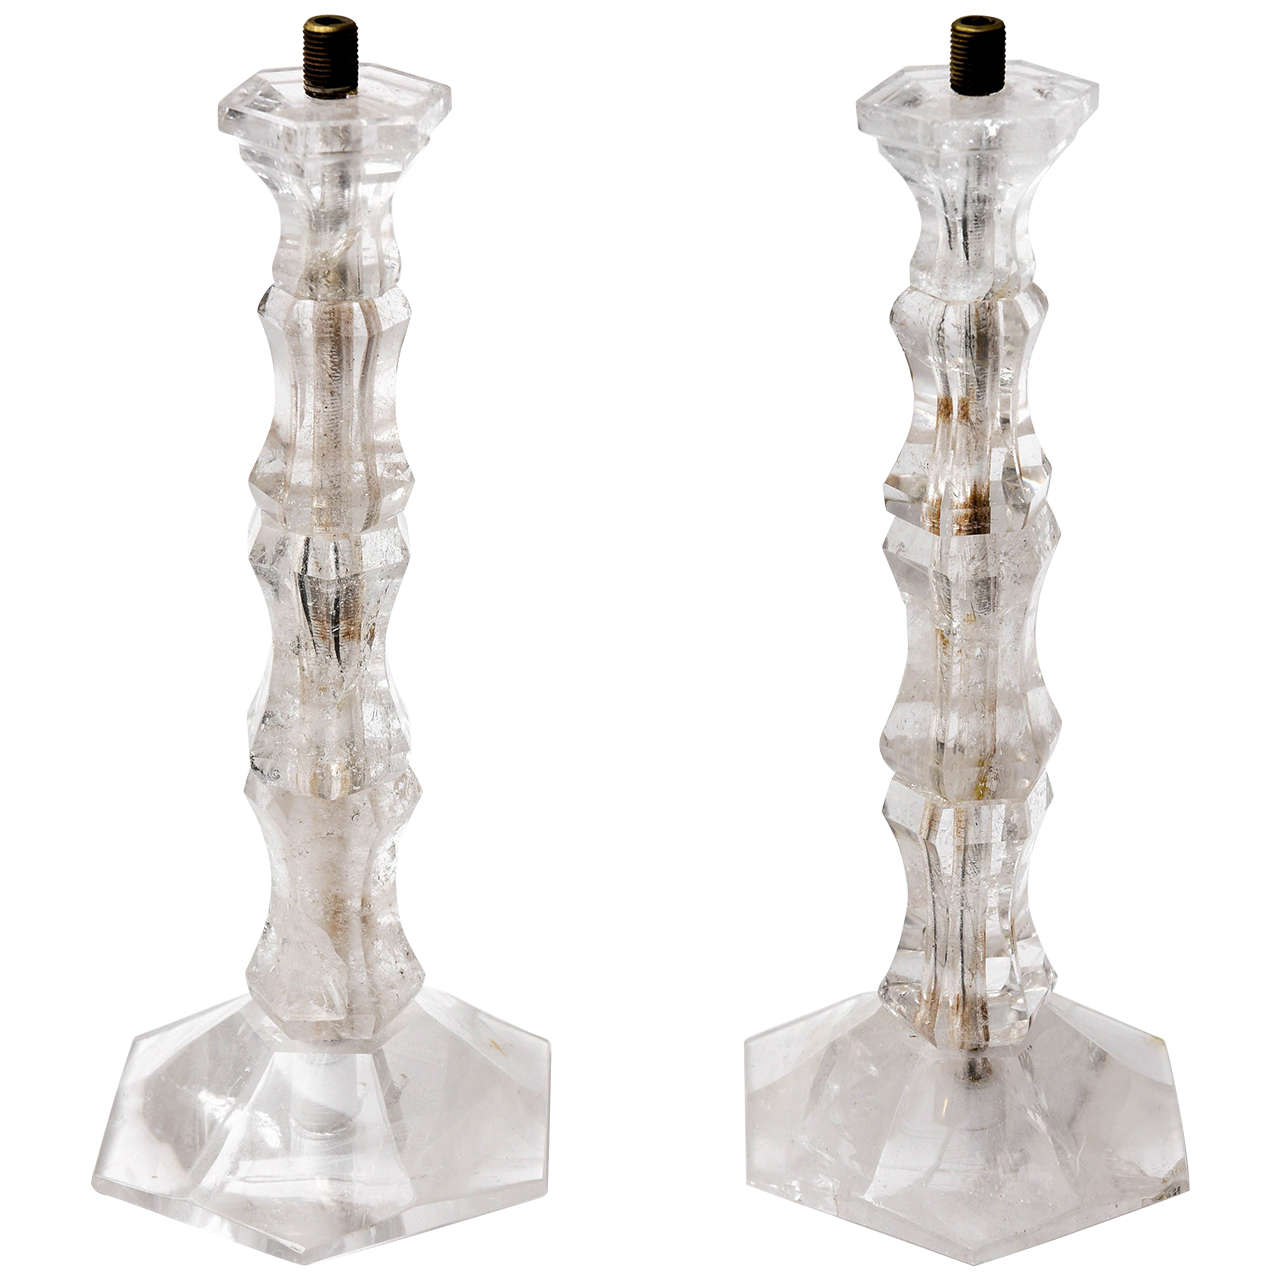 Pair of Rock Crystal Candlesticks Art Deco Period France  For Sale